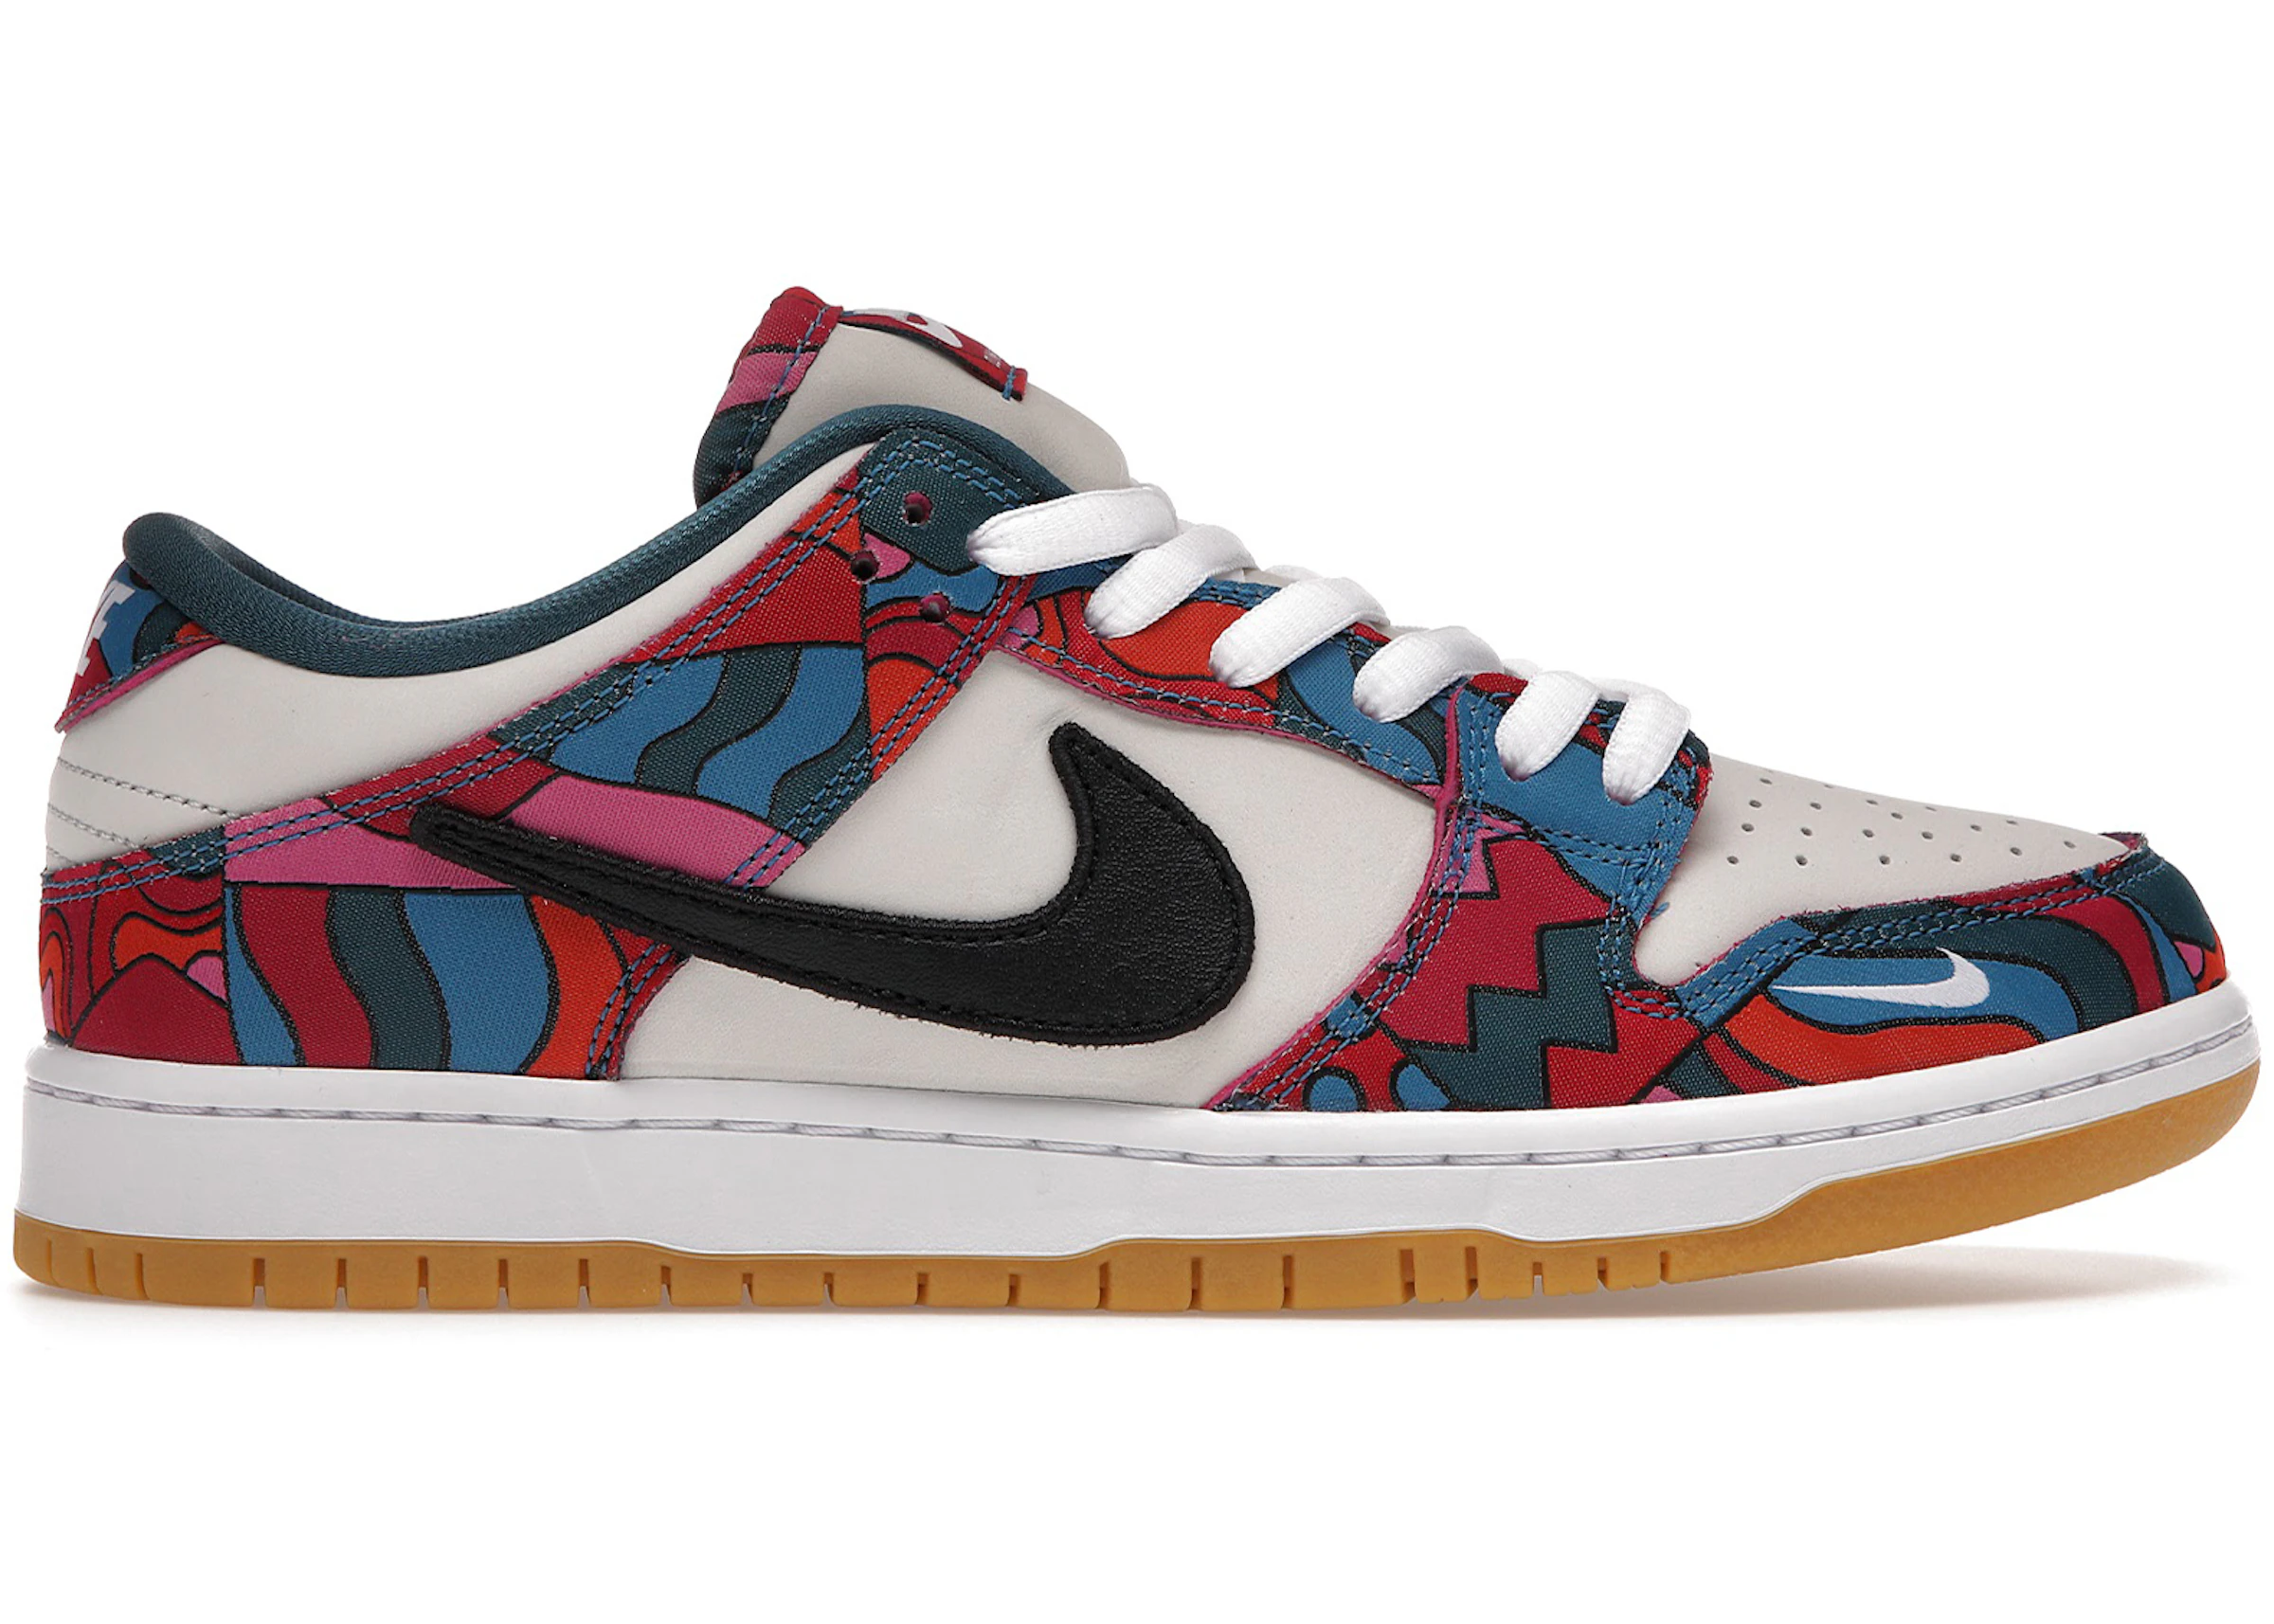 Nike low dunks nike SB Dunk Low Pro Parra Abstract Art (2021) - DH7695-600 - US